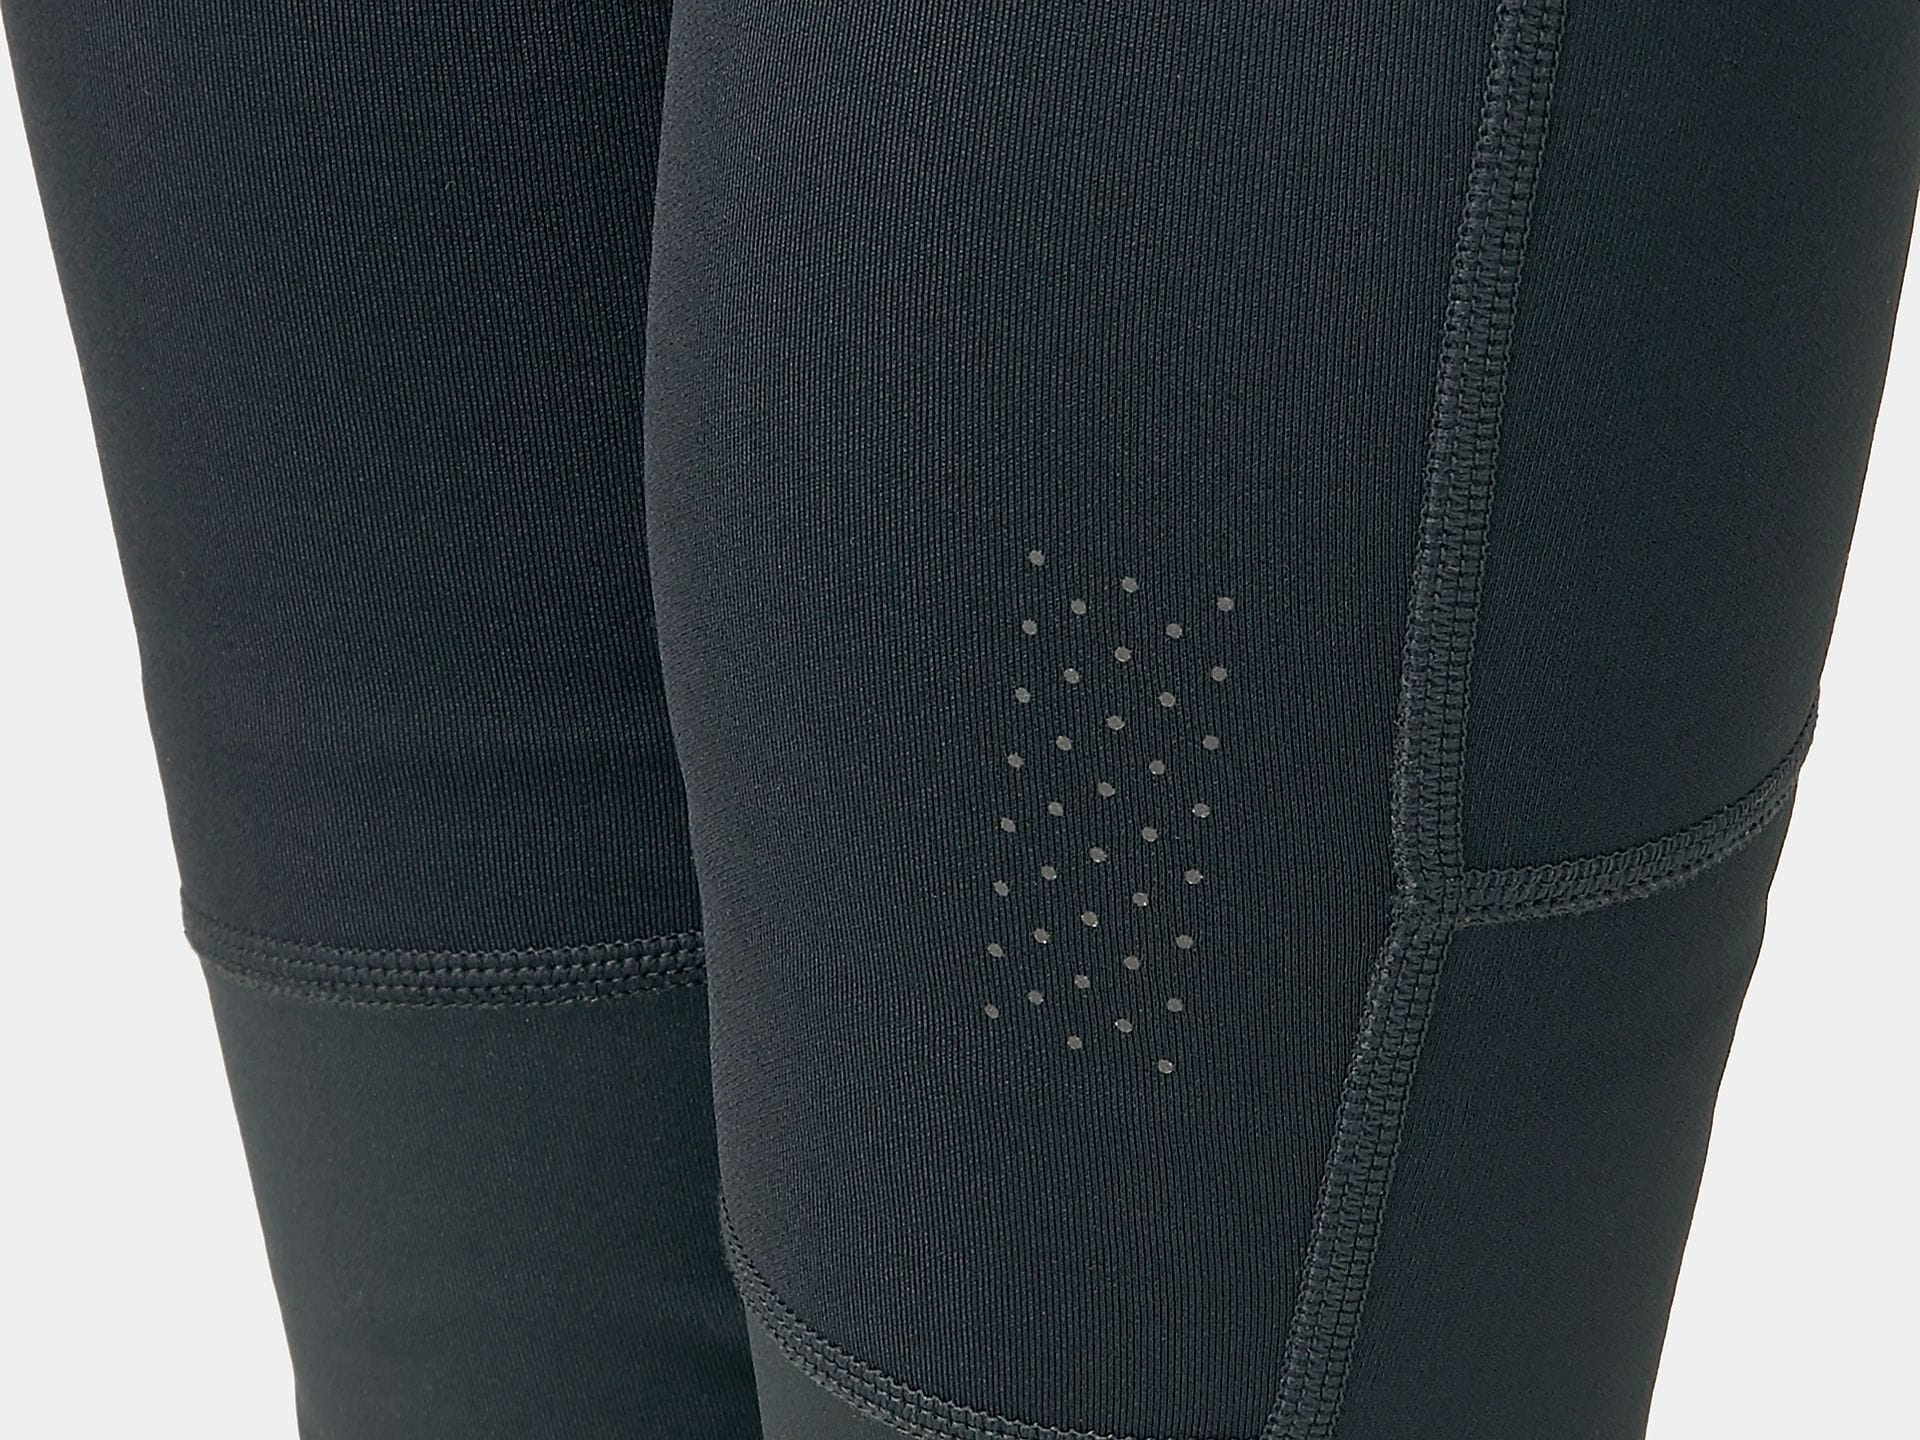 BONTRAGER CIRCUIT WOMEN'S THERMAL UNPADDED TIGHTS